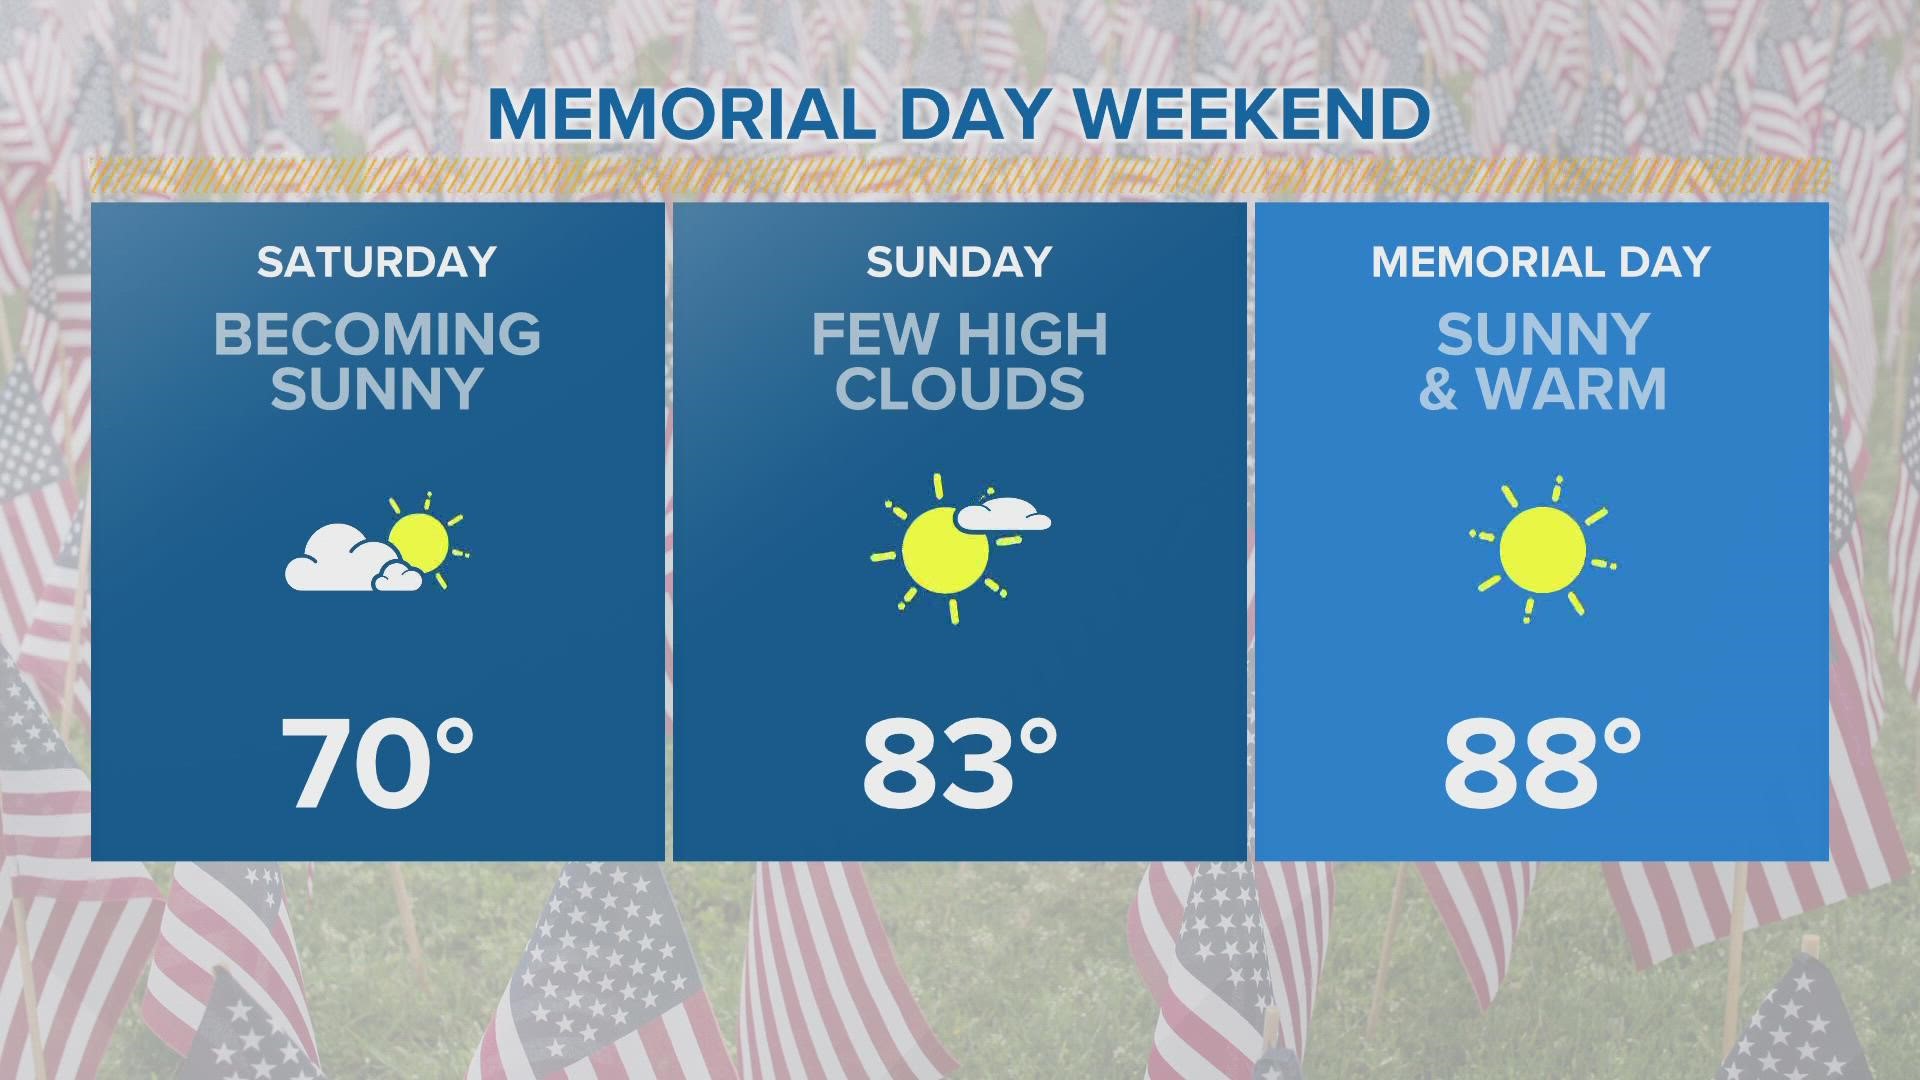 Payton says to expect a warm and dry Saturday to kick off your Memorial Day weekend plans.